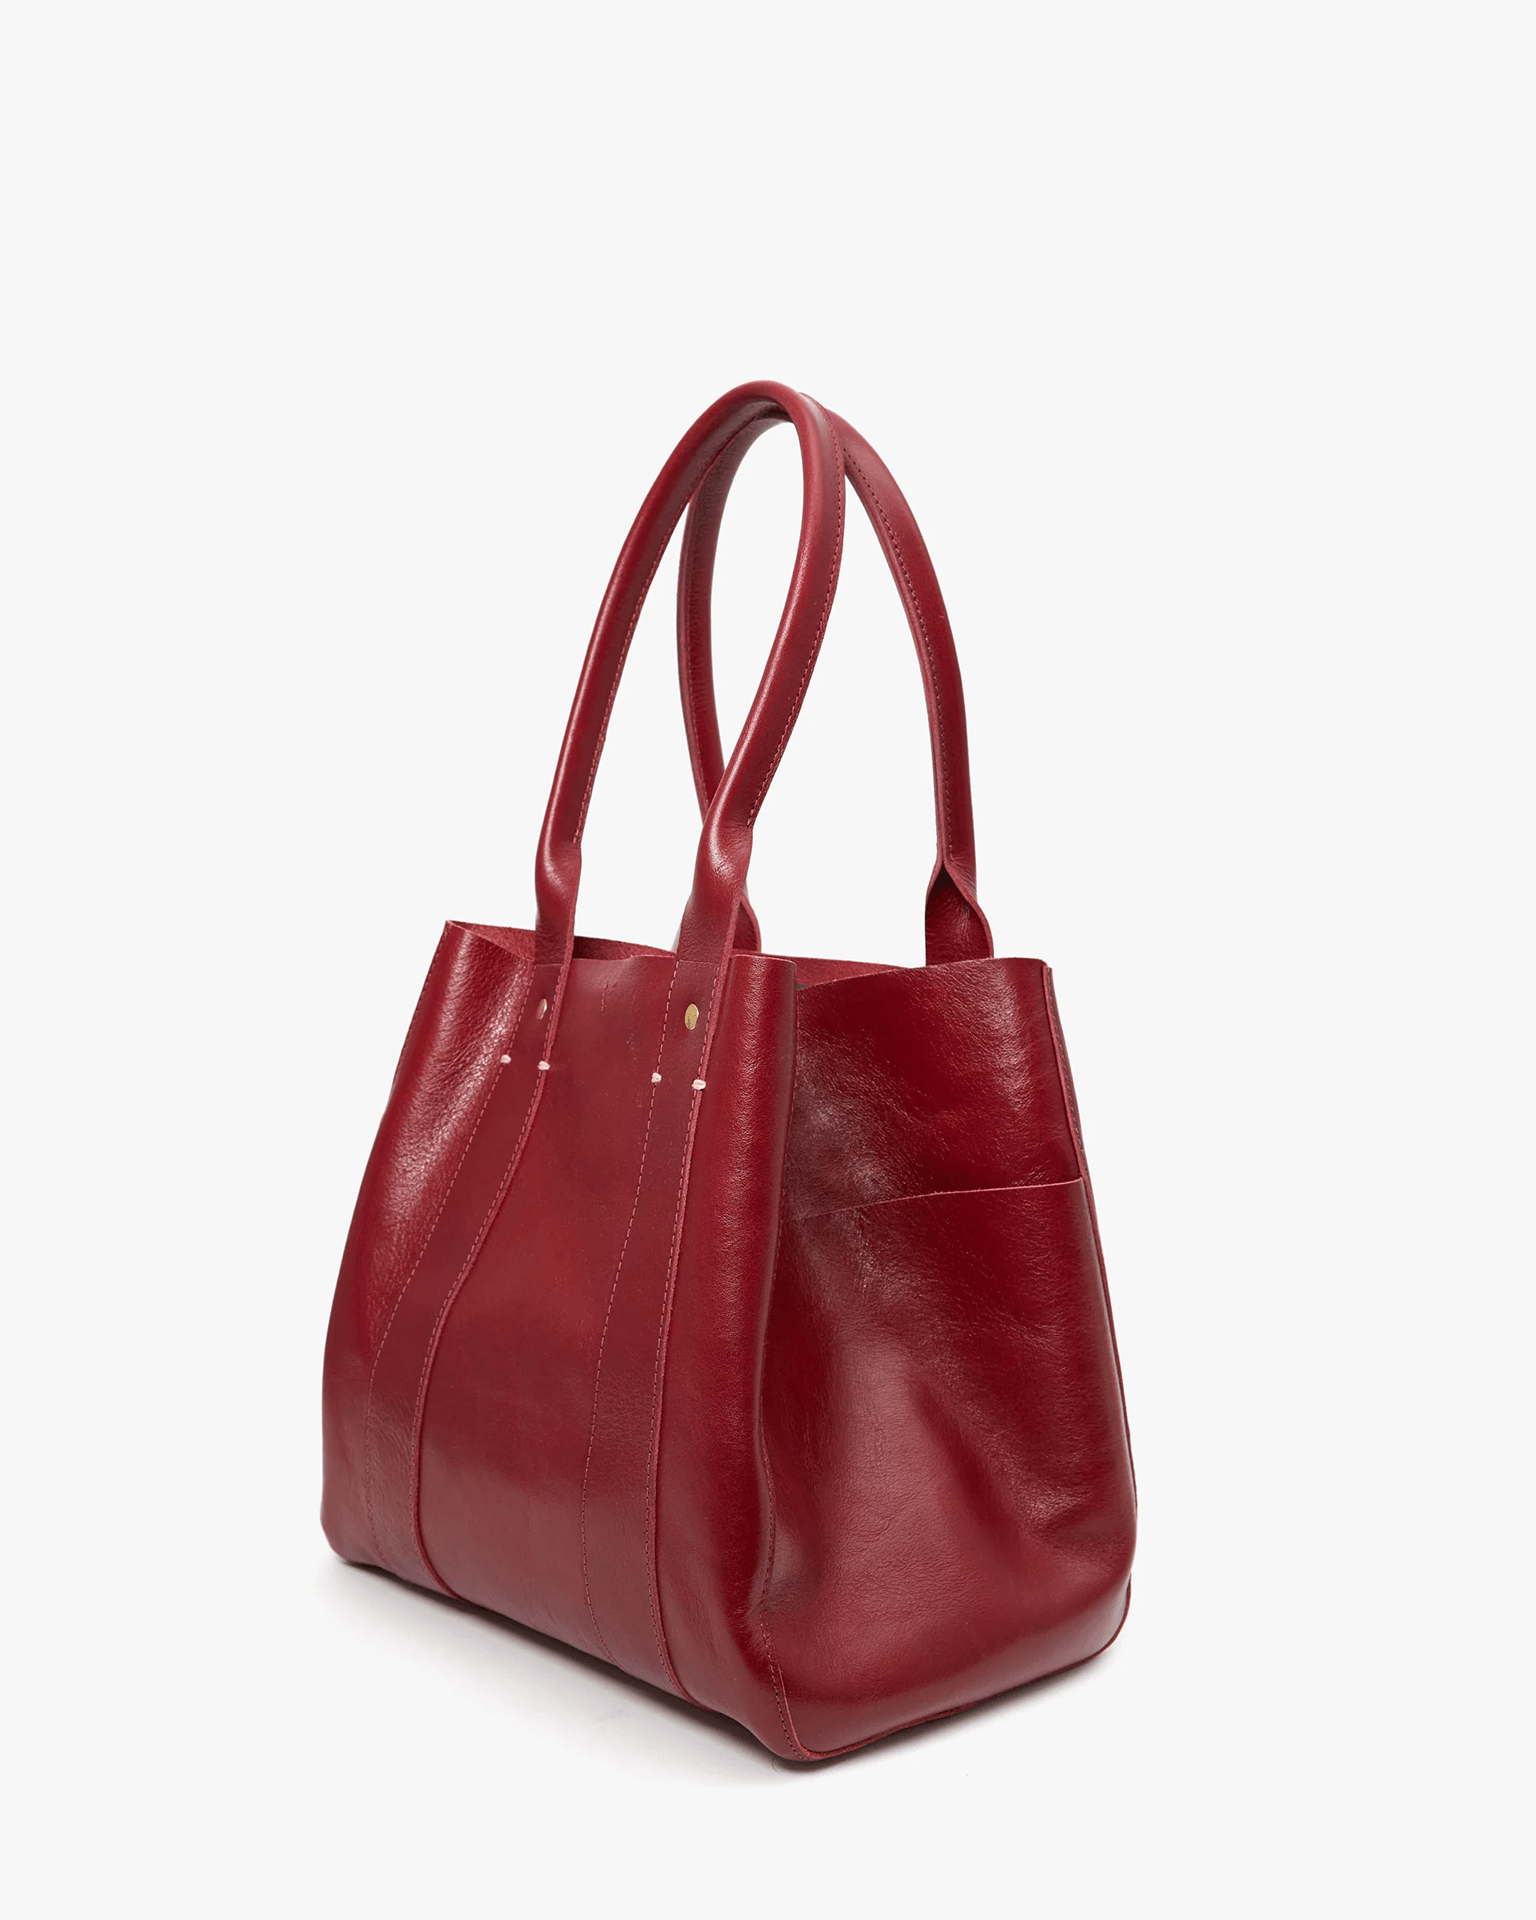 Clare V. Le Slim Box Tote in Oxblood - Bliss Boutiques